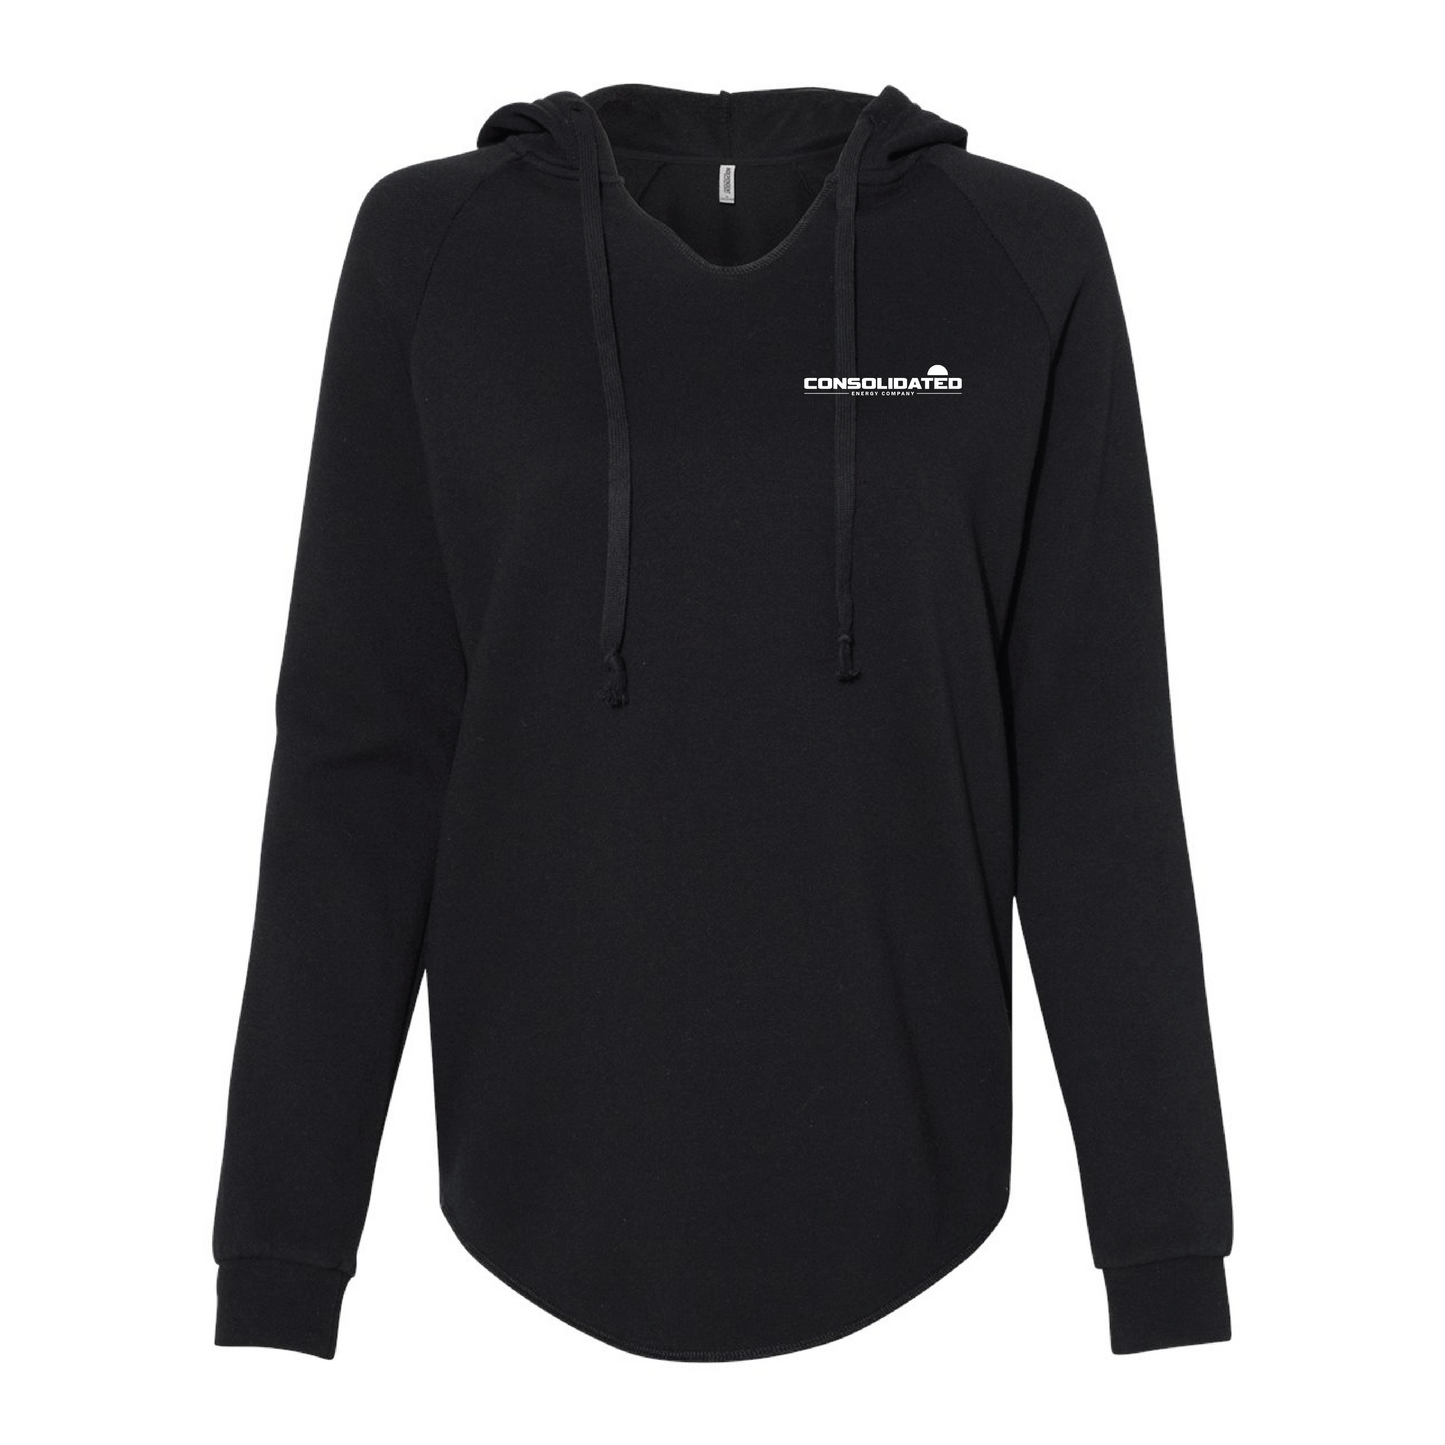 Consolidated Energy Limited Edition Ladies Fleece